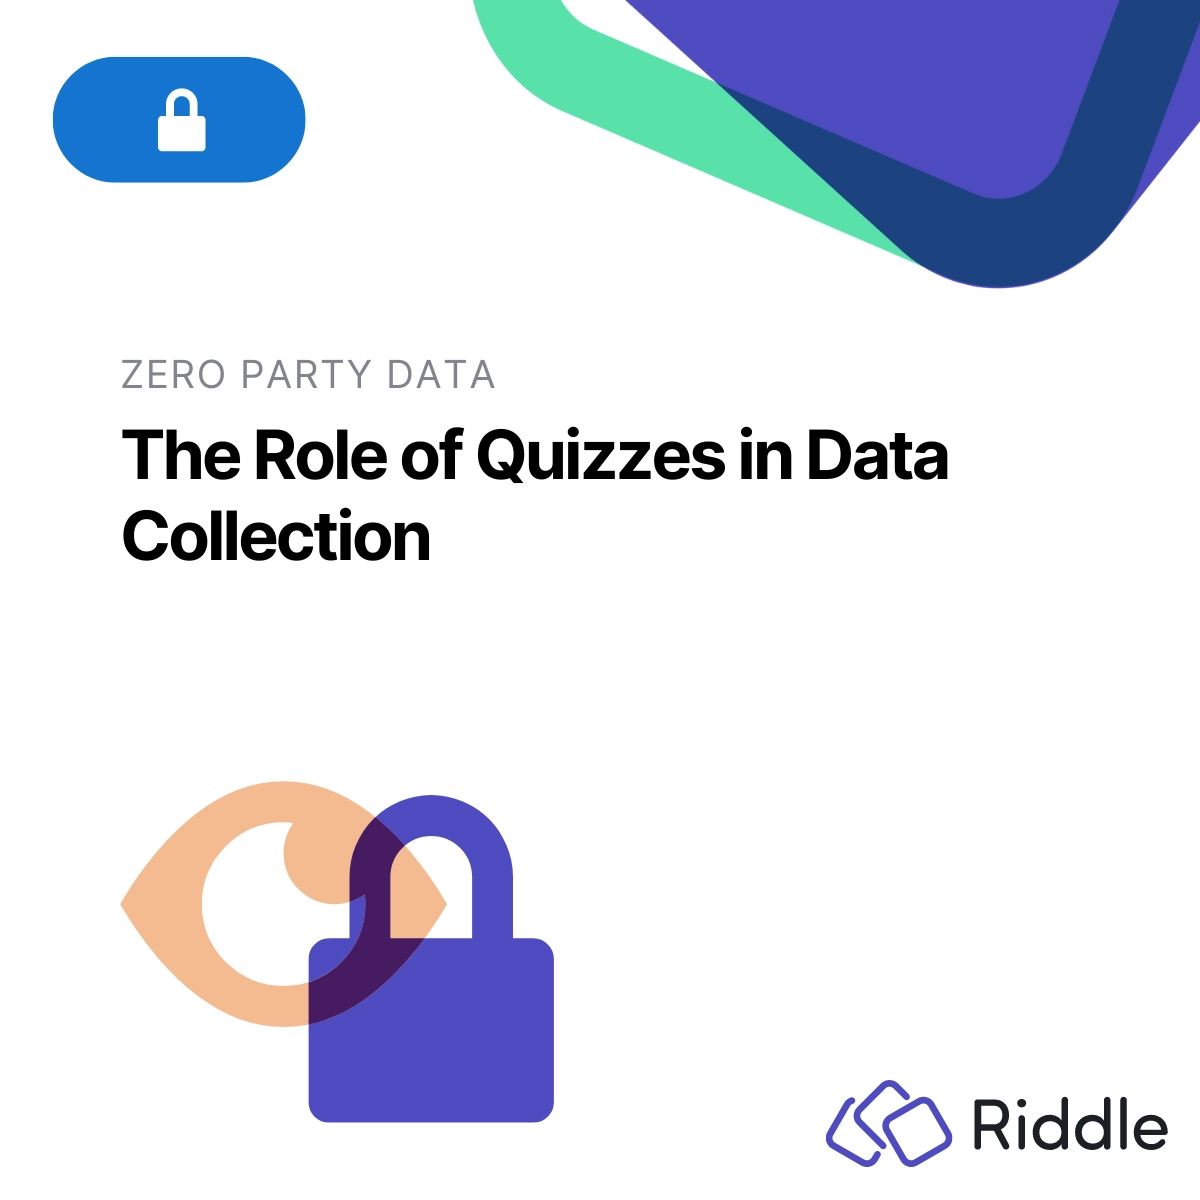 The role of quizzes in data collection